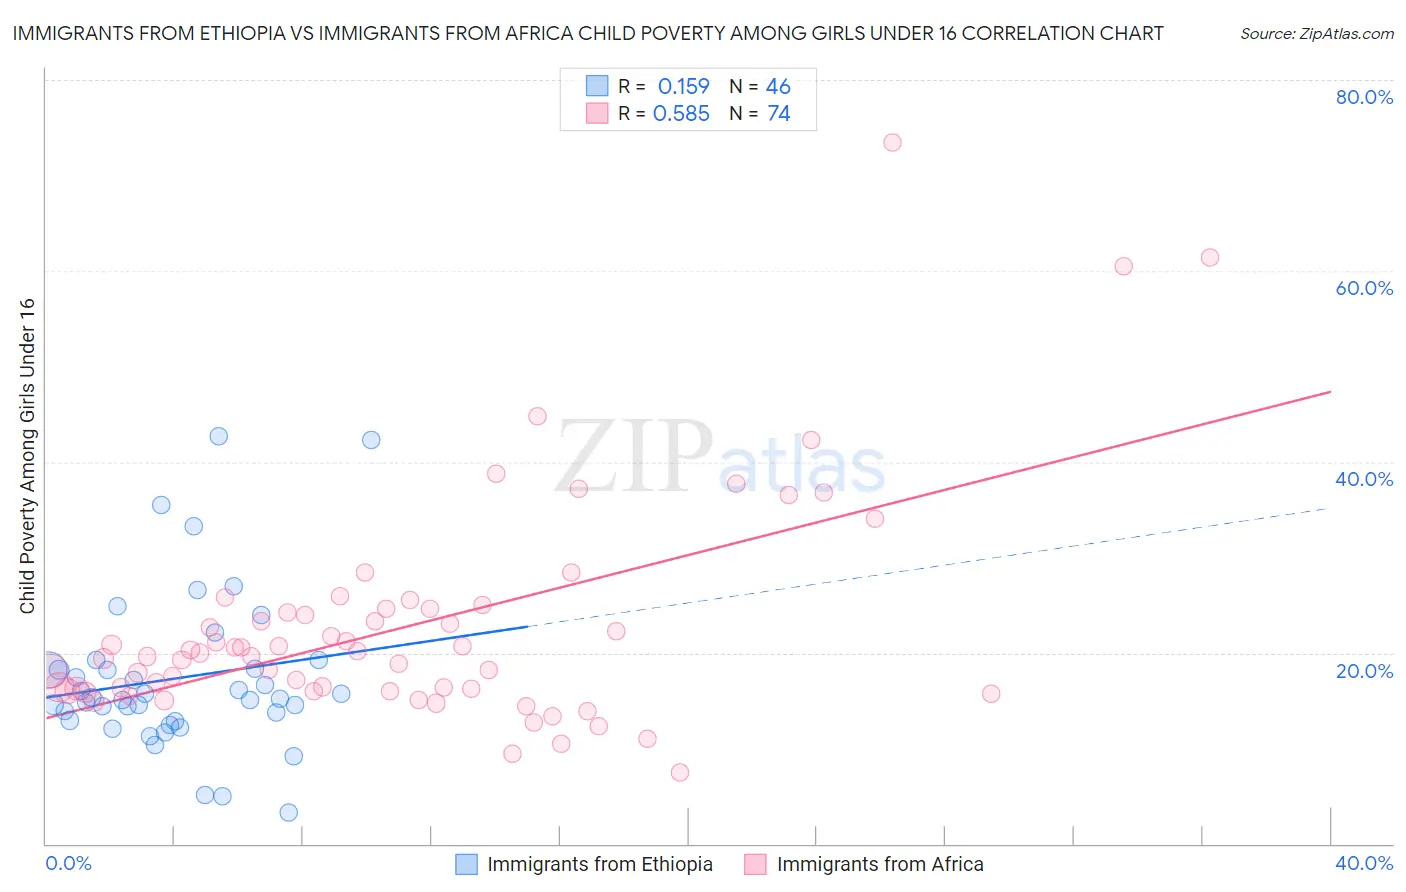 Immigrants from Ethiopia vs Immigrants from Africa Child Poverty Among Girls Under 16